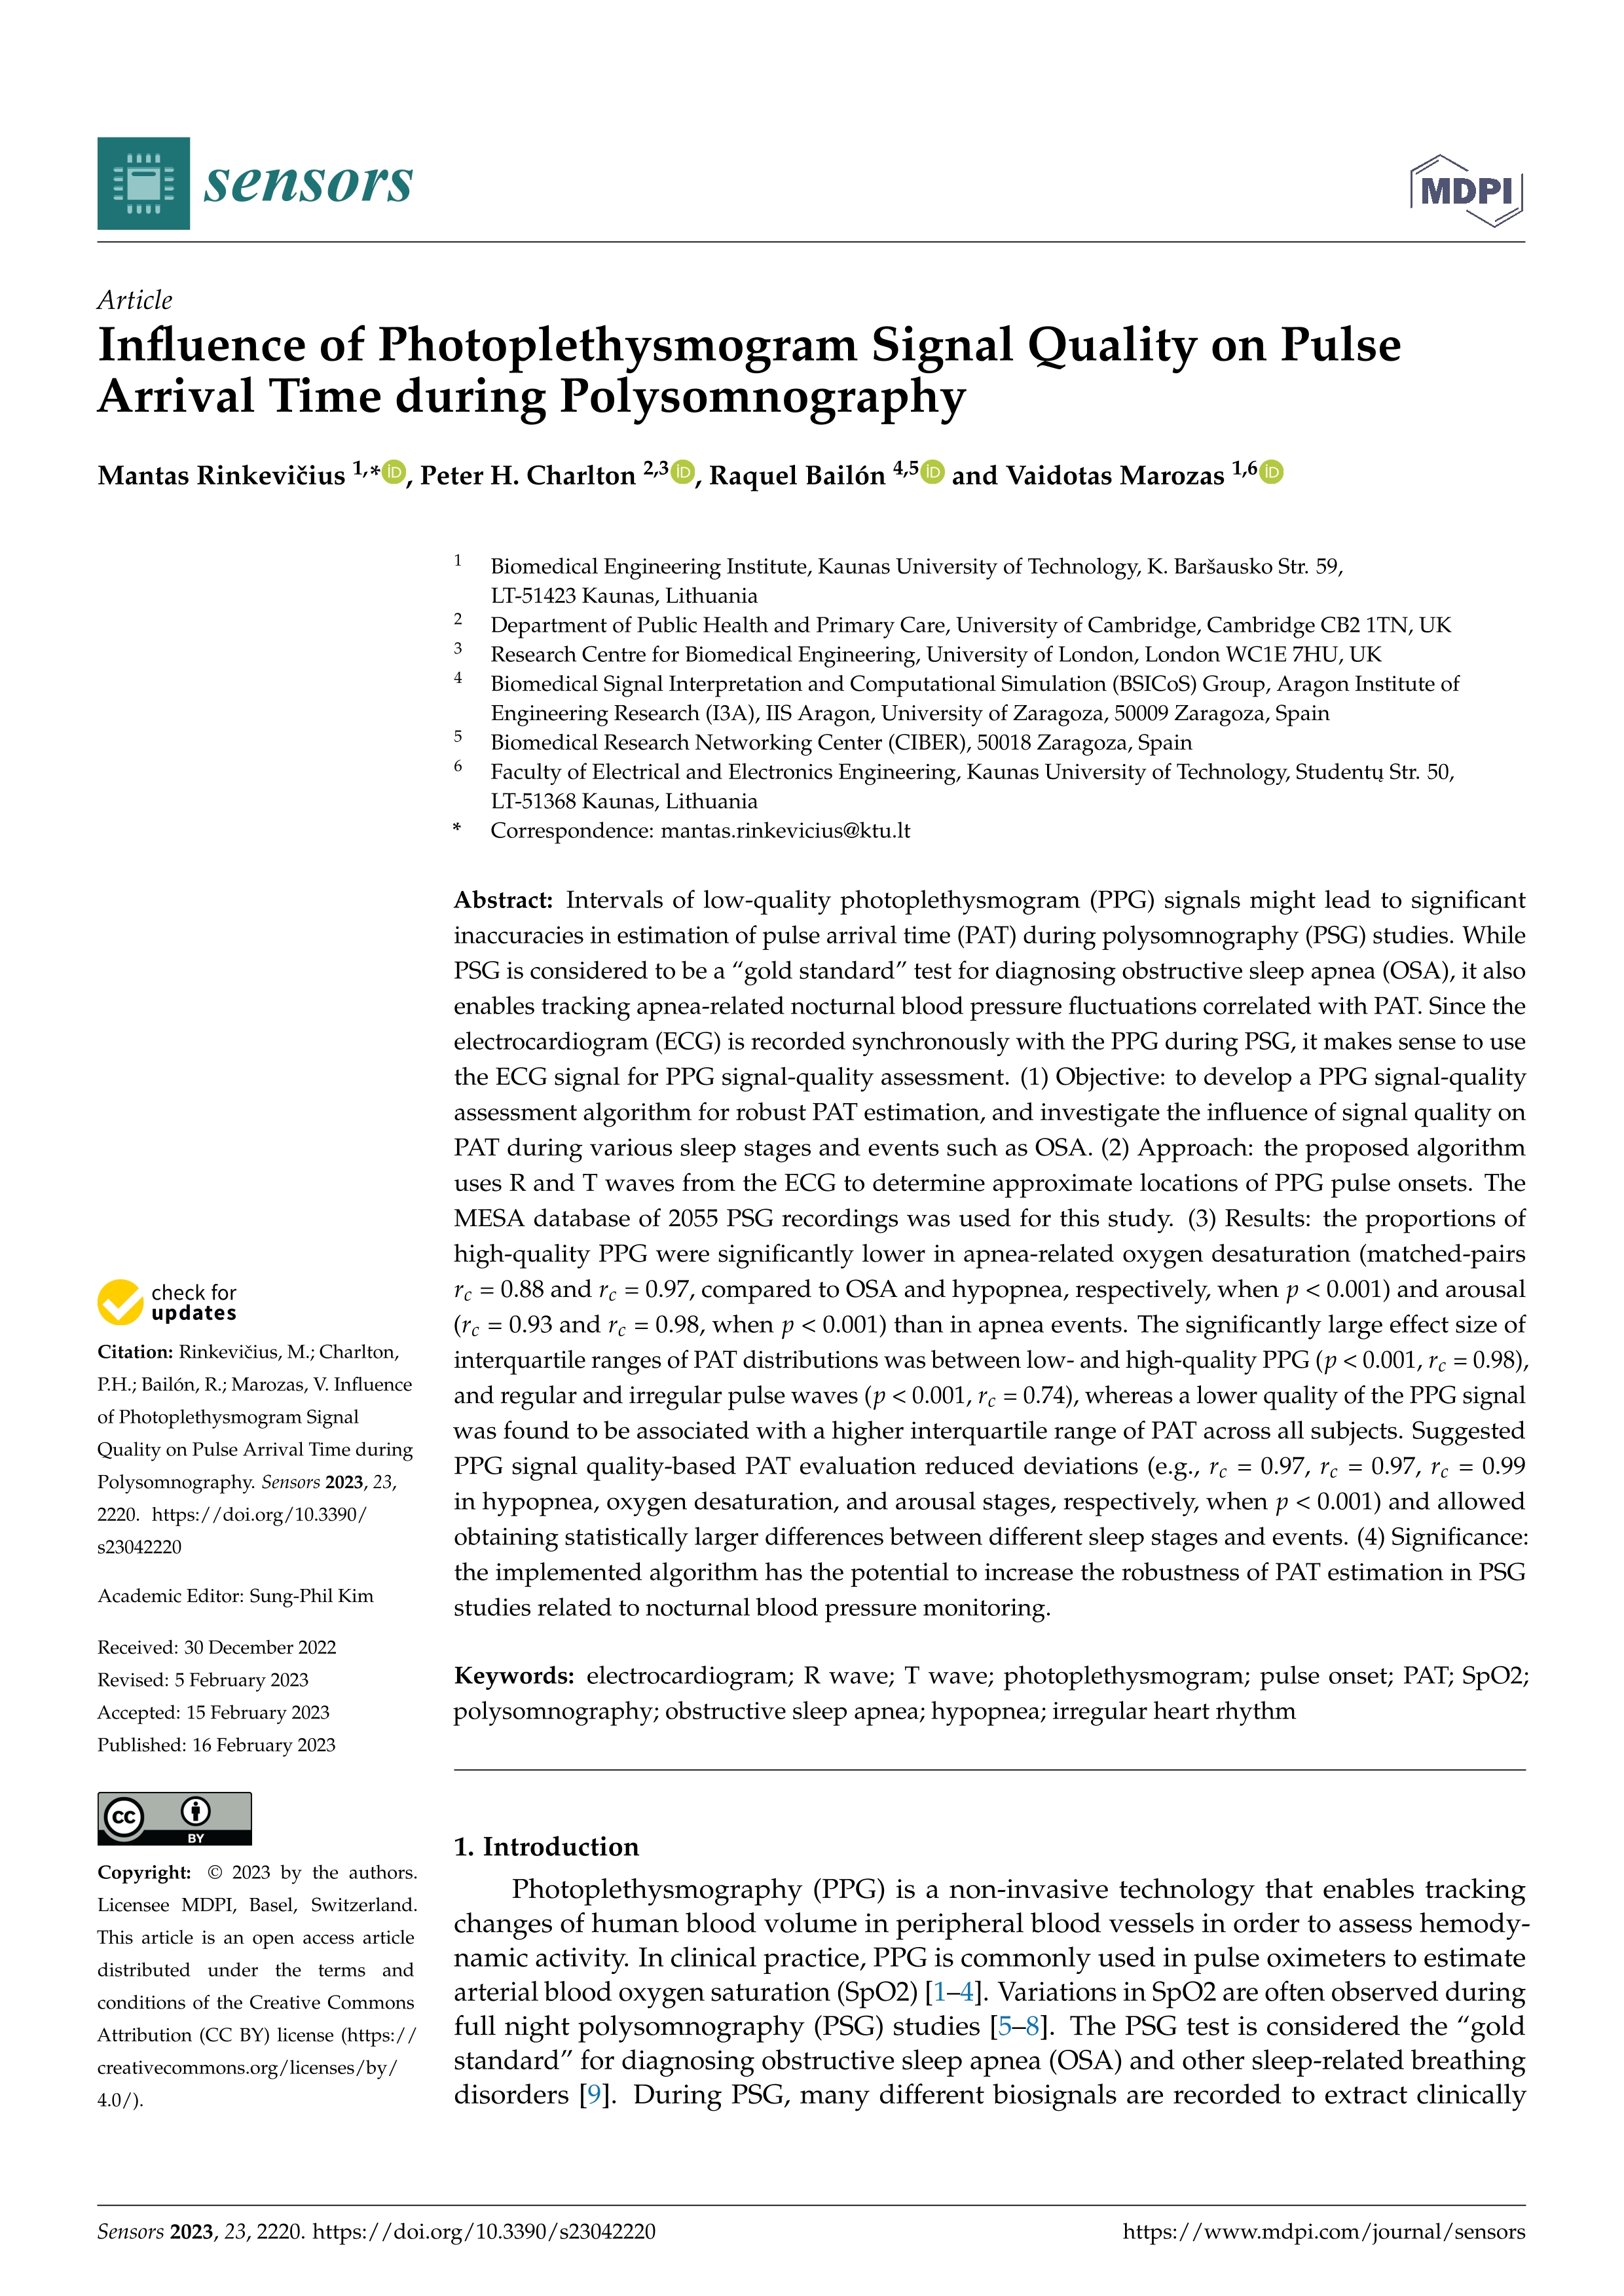 Influence of photoplethysmogram signal quality on pulse arrival time during polysomnography